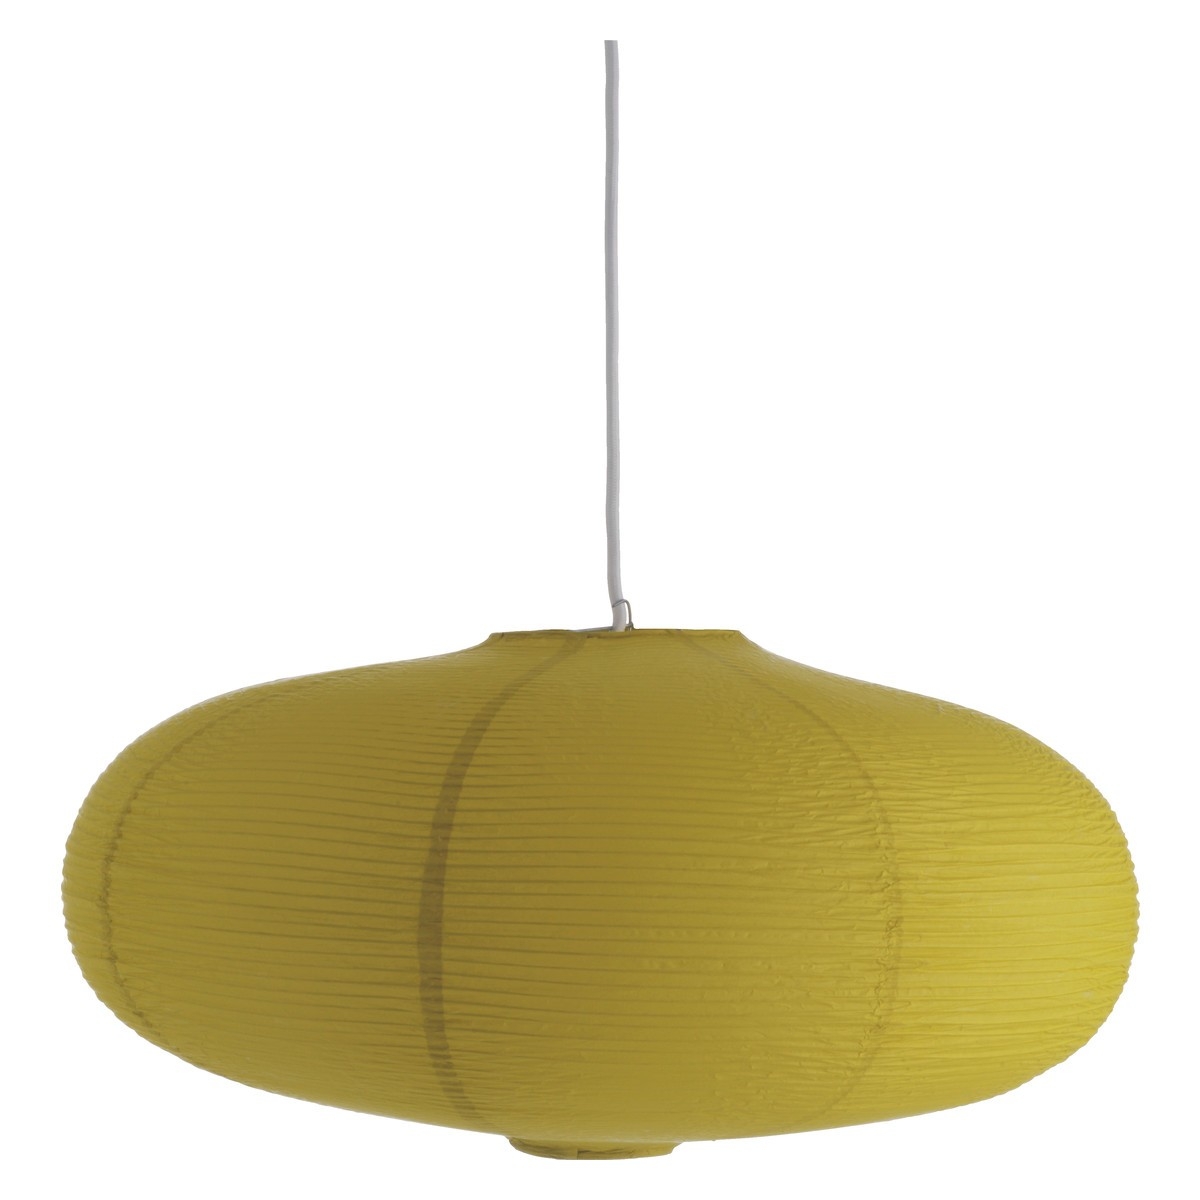 Paper Ceiling Light Shade1200 X 1200